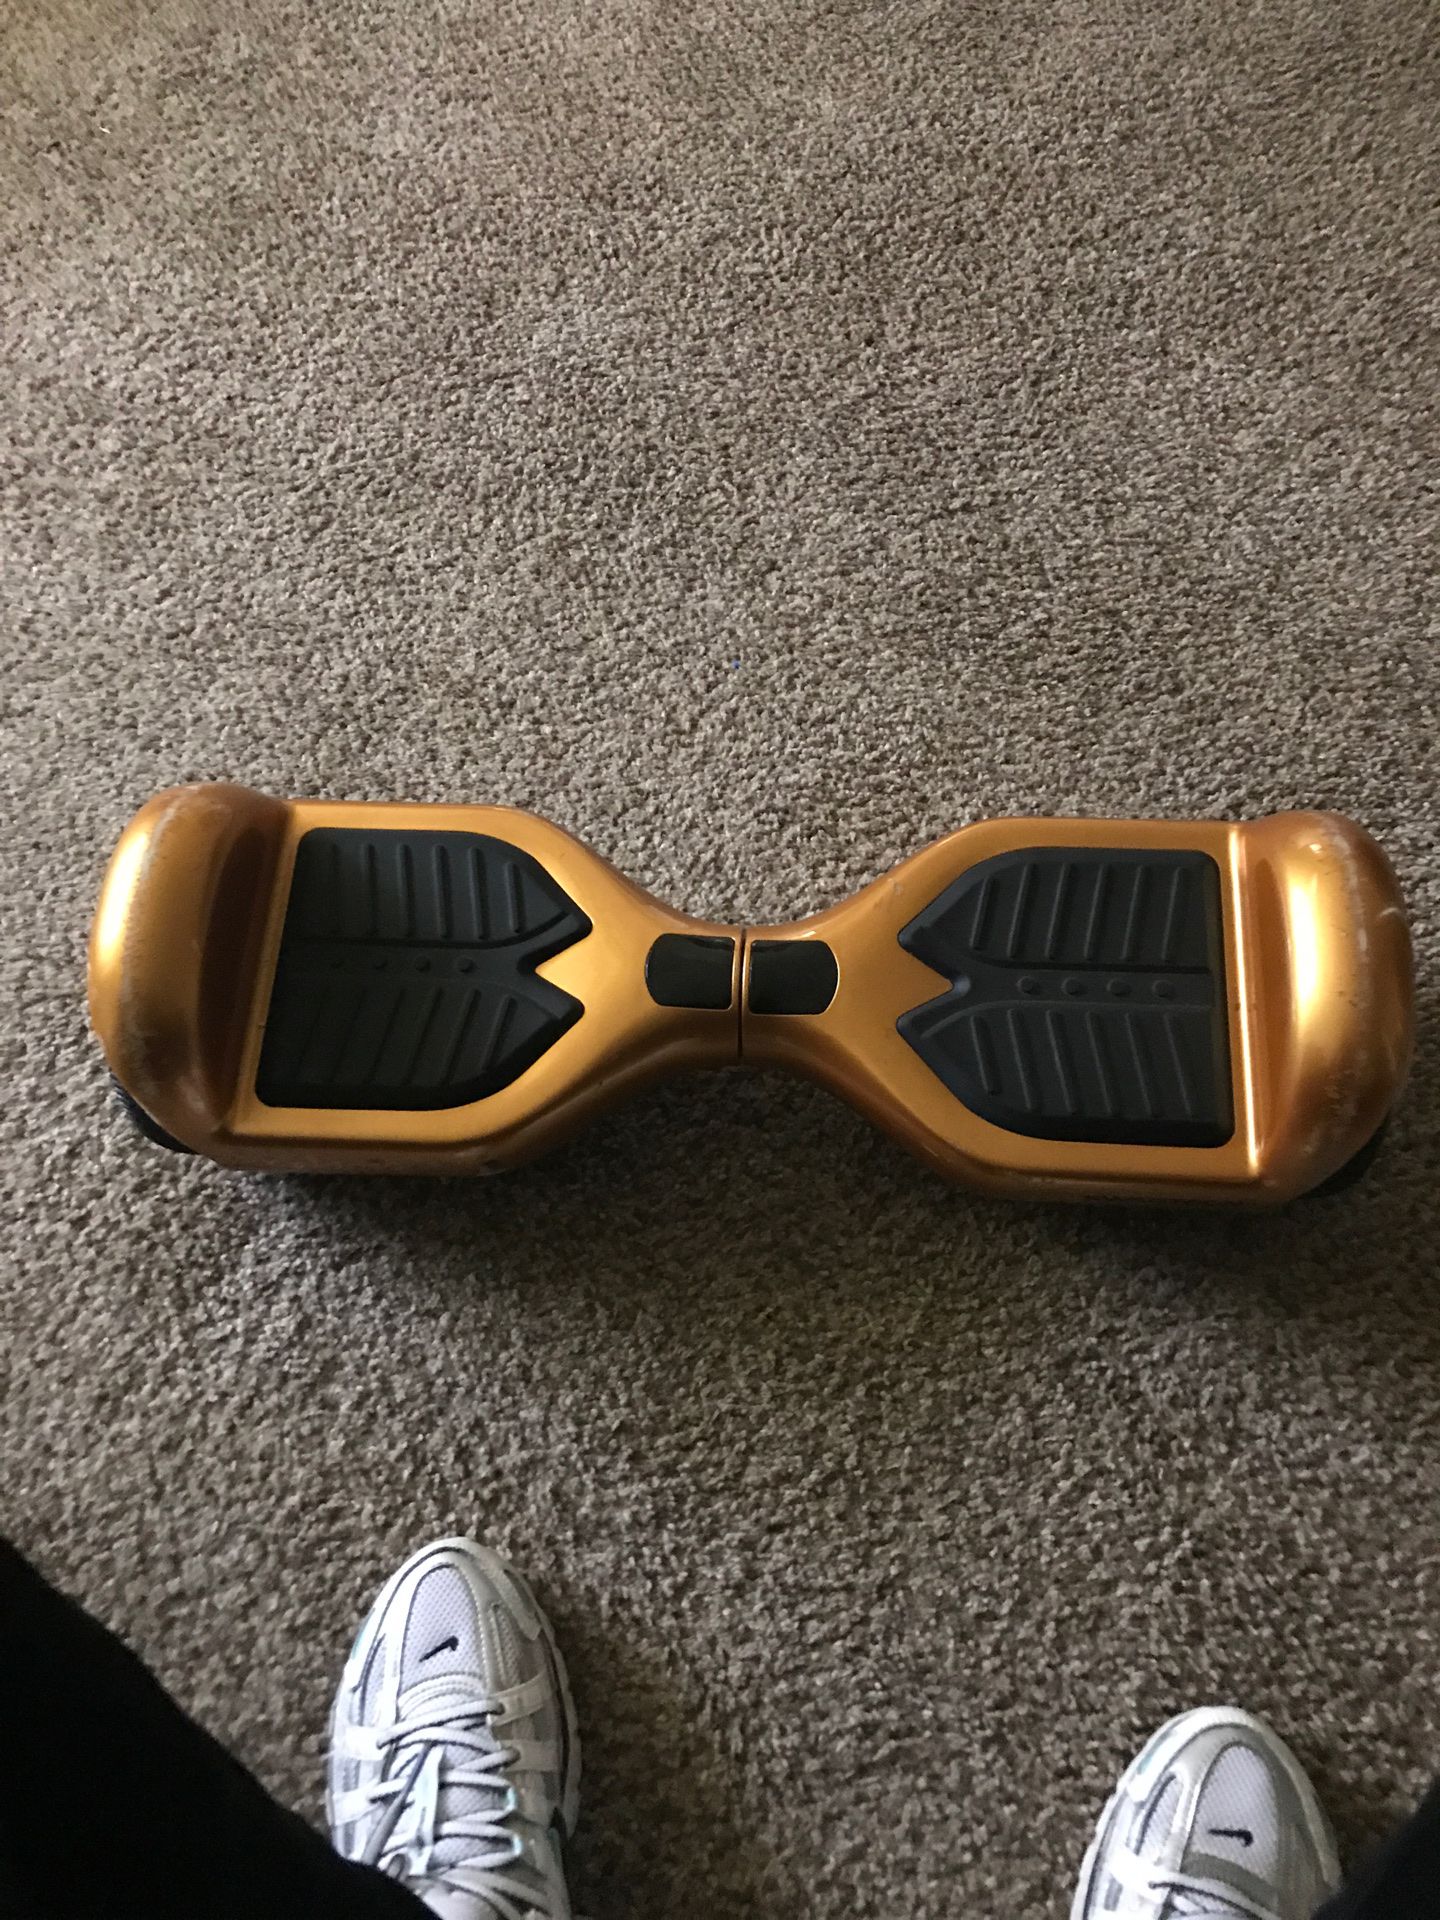 Swagtron hoverboard